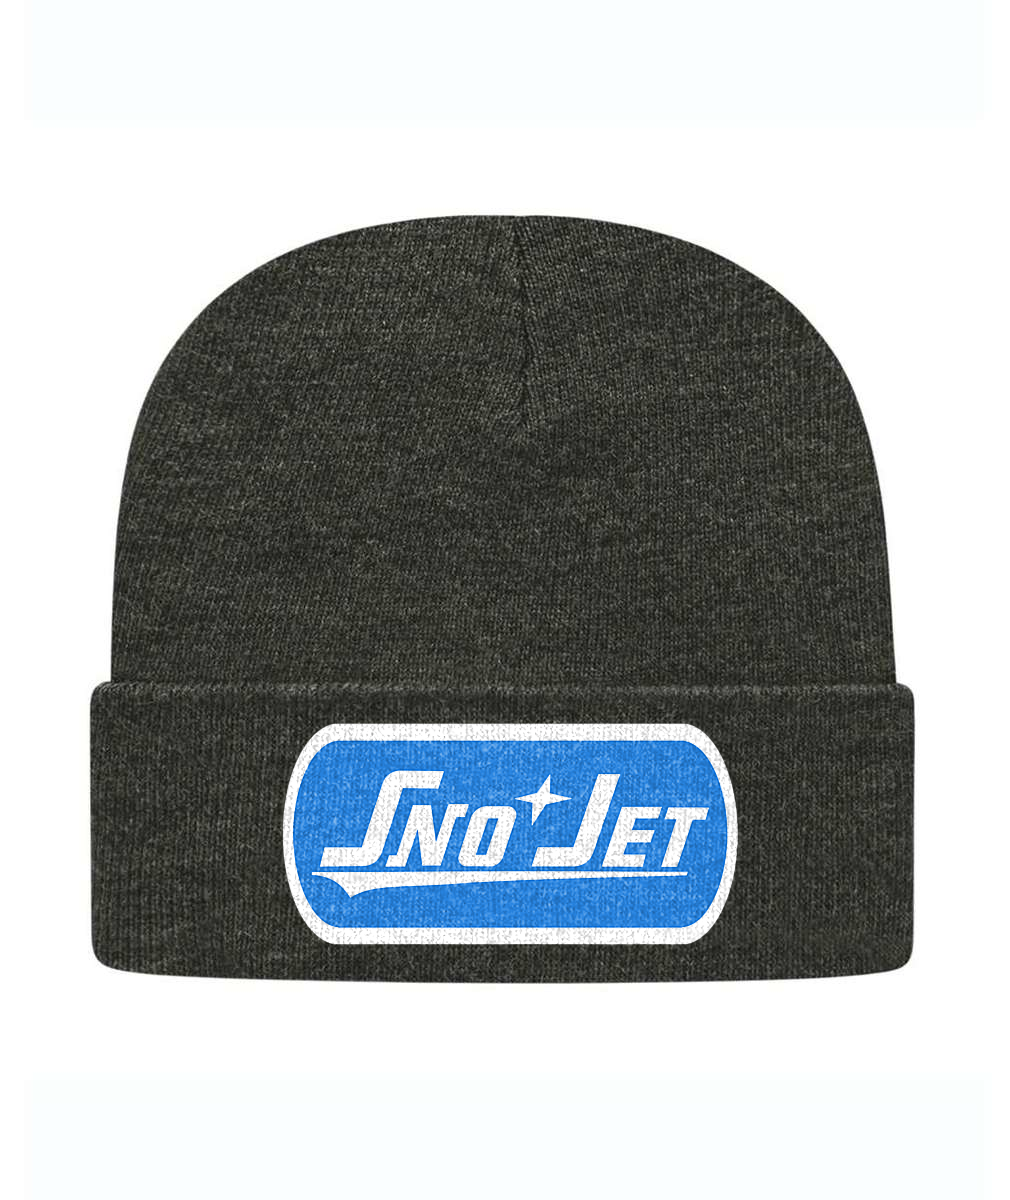 Vintage Sno Jet Embroidered Knit Beanie or Similar